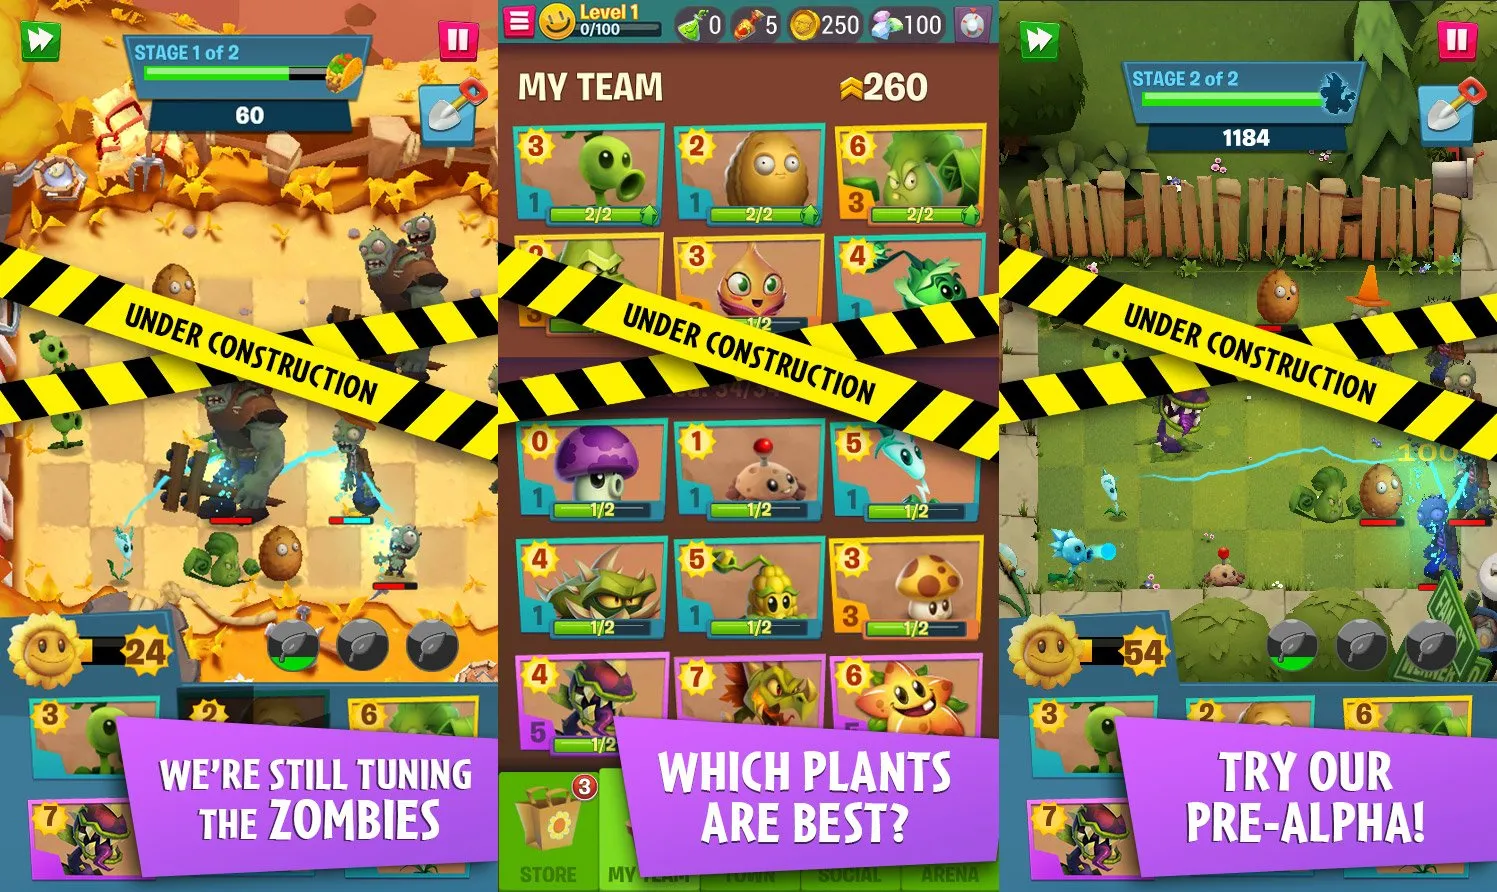 LIMITED TERRITORY TESTING FOR PVZ 3!